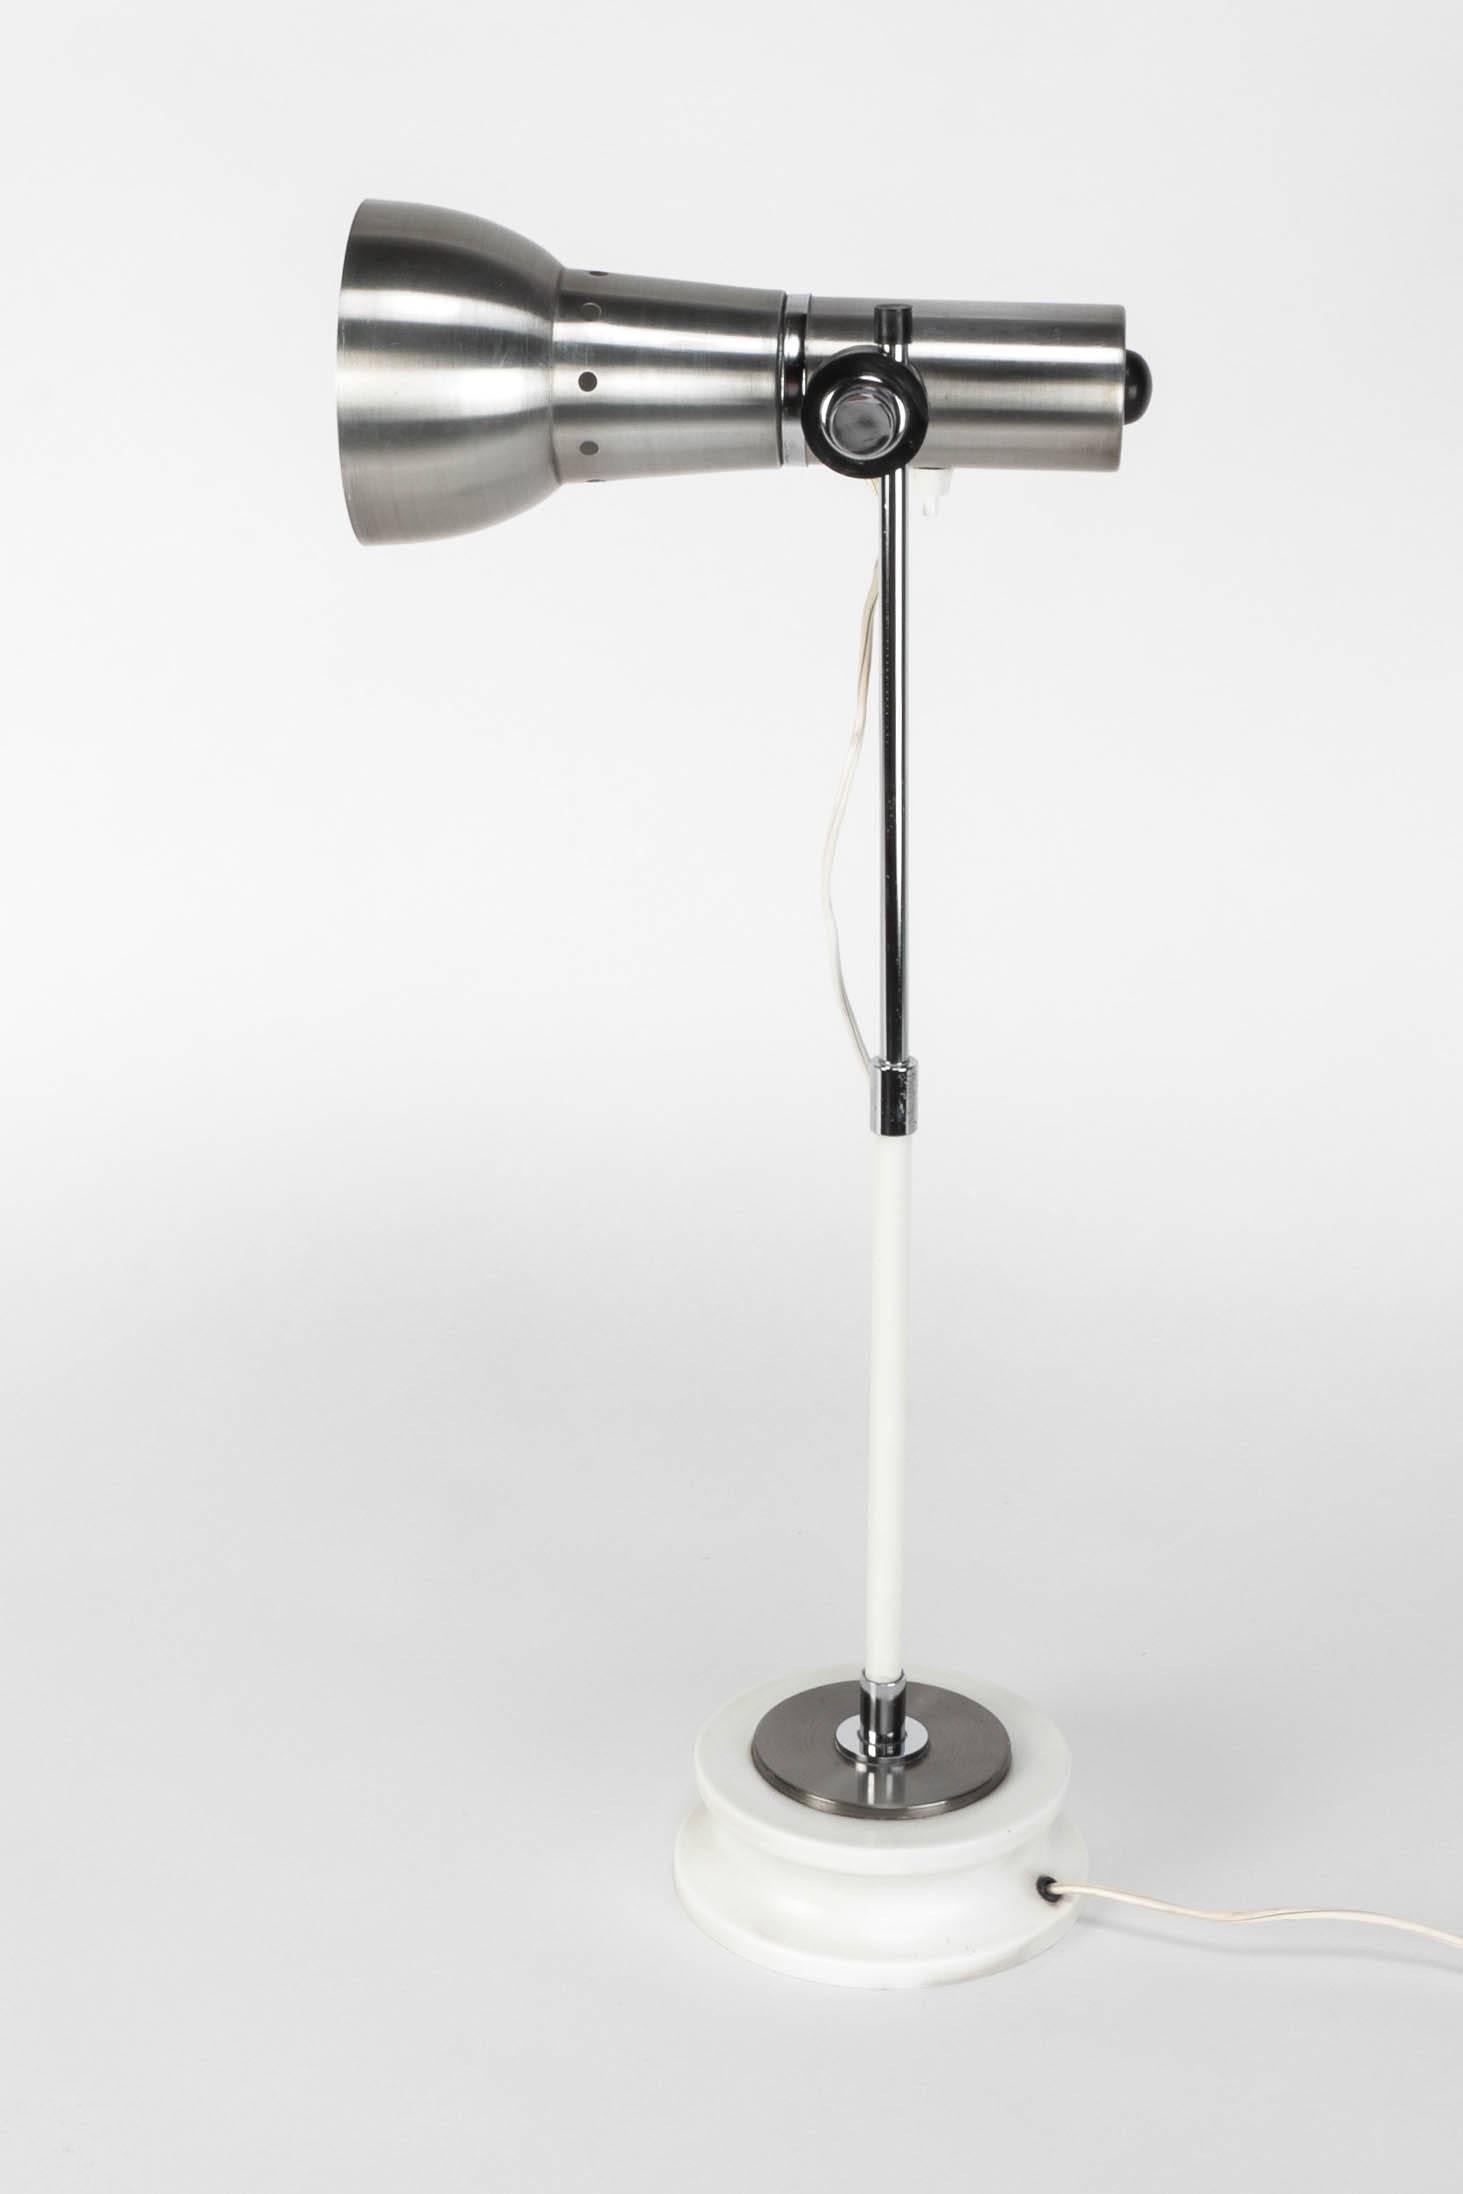 Lovely Italian table lamp by Stilnovo, 1960's. White lacquered metal base, brushed aluminum shade, shade is adjustable. The switch is located on the shade.